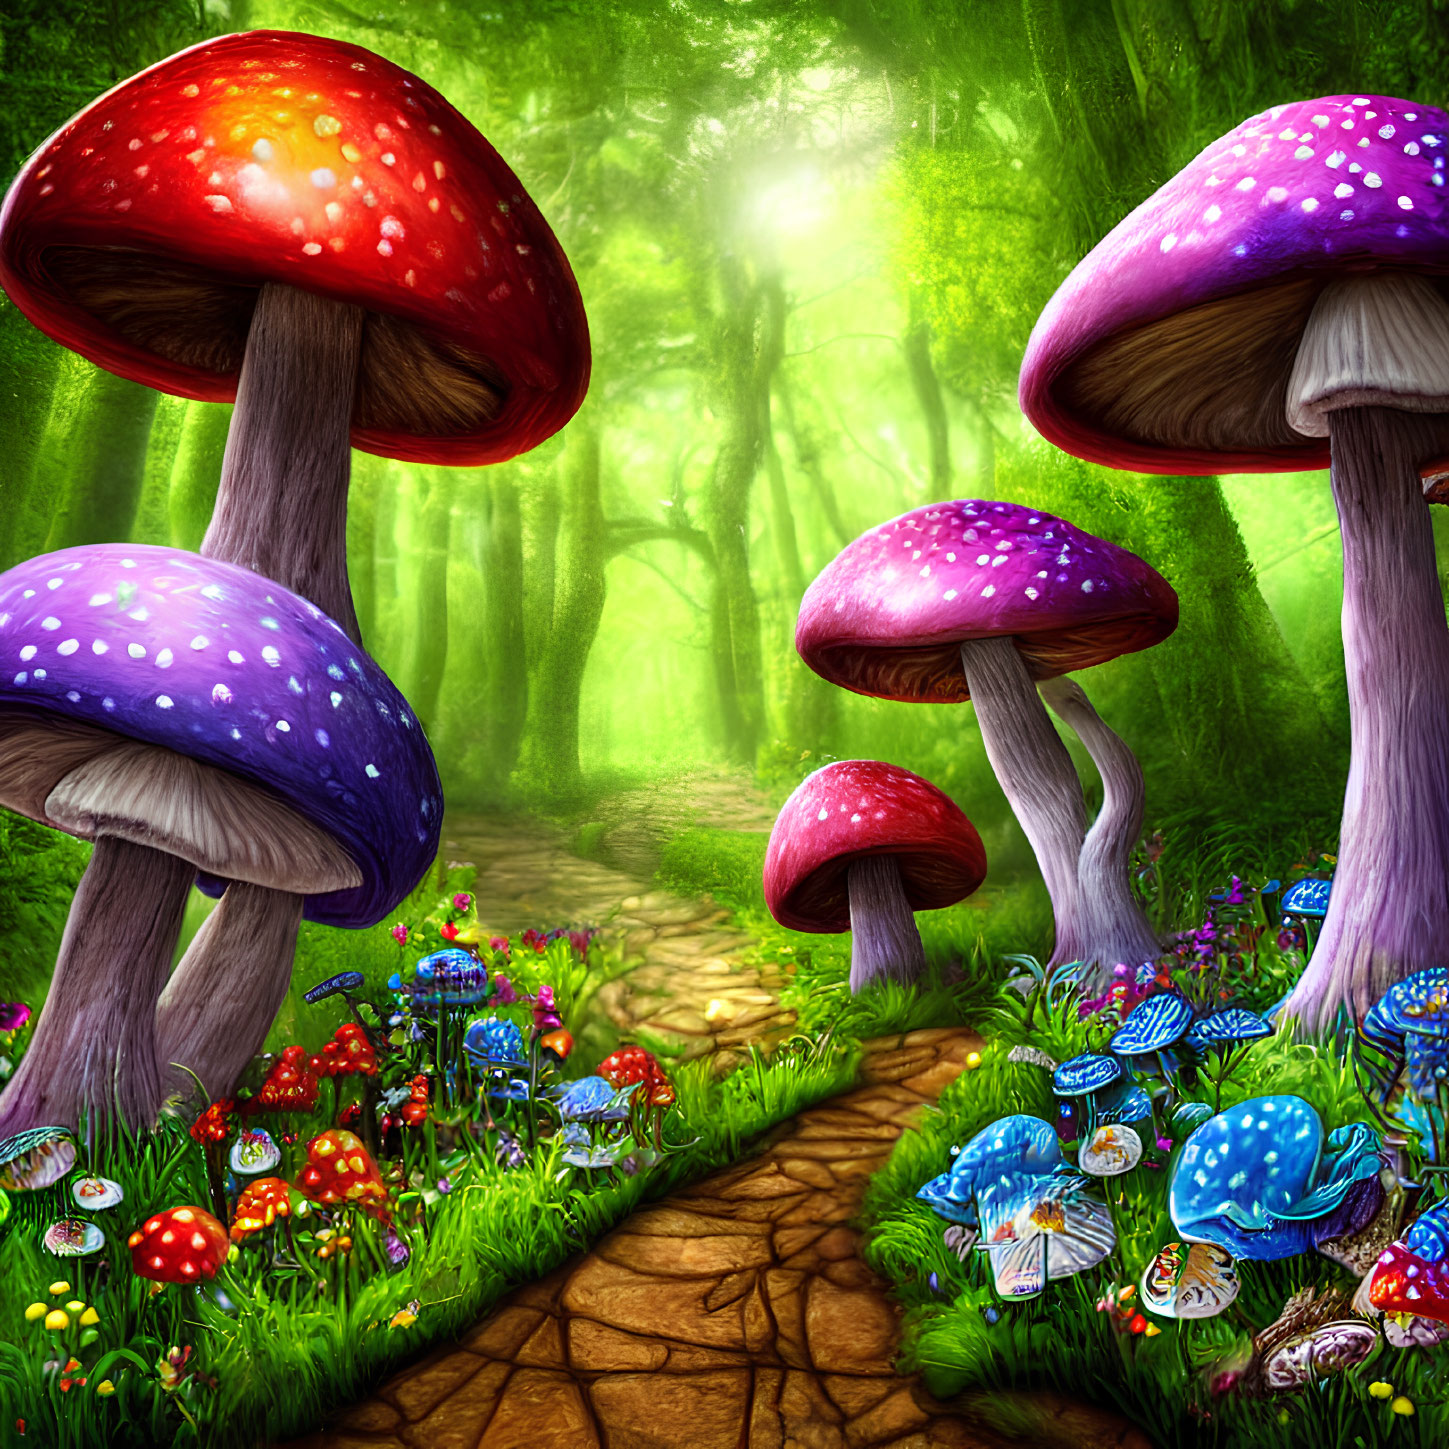 Enchanting forest path with oversized mushrooms and vibrant flora